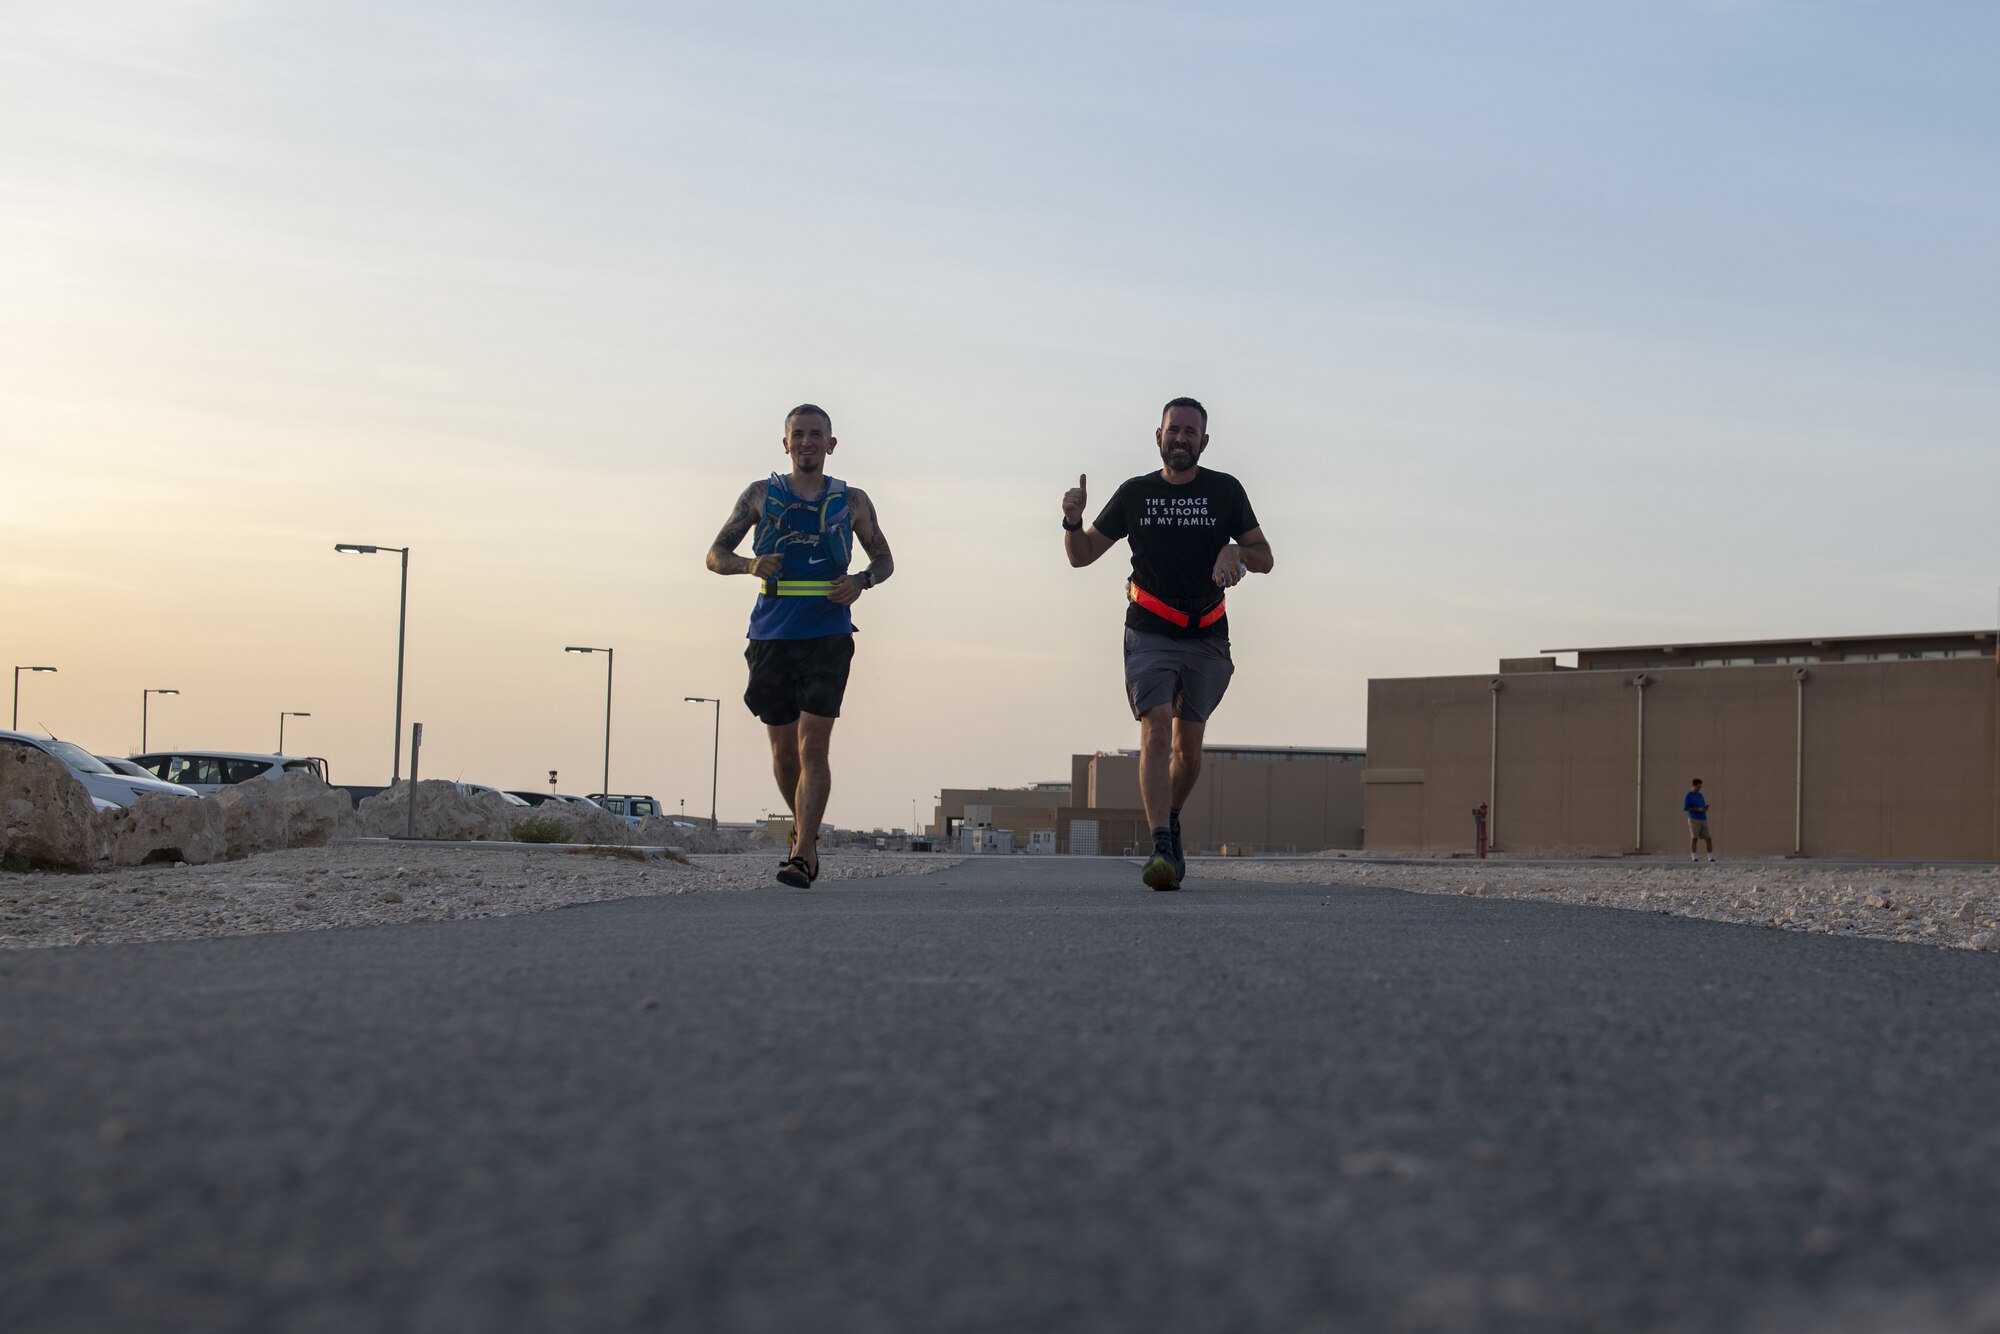 German Air Force Master Sgt. Christoph Lenz, Combined Air Operations Center German Detachment IT admin, left, and Patrick Buzzard, AFCENT Information Protection director, right, jog during Buzzard’s 51-mile run at Al Udeid Air Base, Qatar, July 30, 2021. Buzzard ran 51 miles for his 51st birthday with the help of 13 members from the CAOC. (U.S. Air Force photo by Tech. Sgt. Dylan Nuckolls)